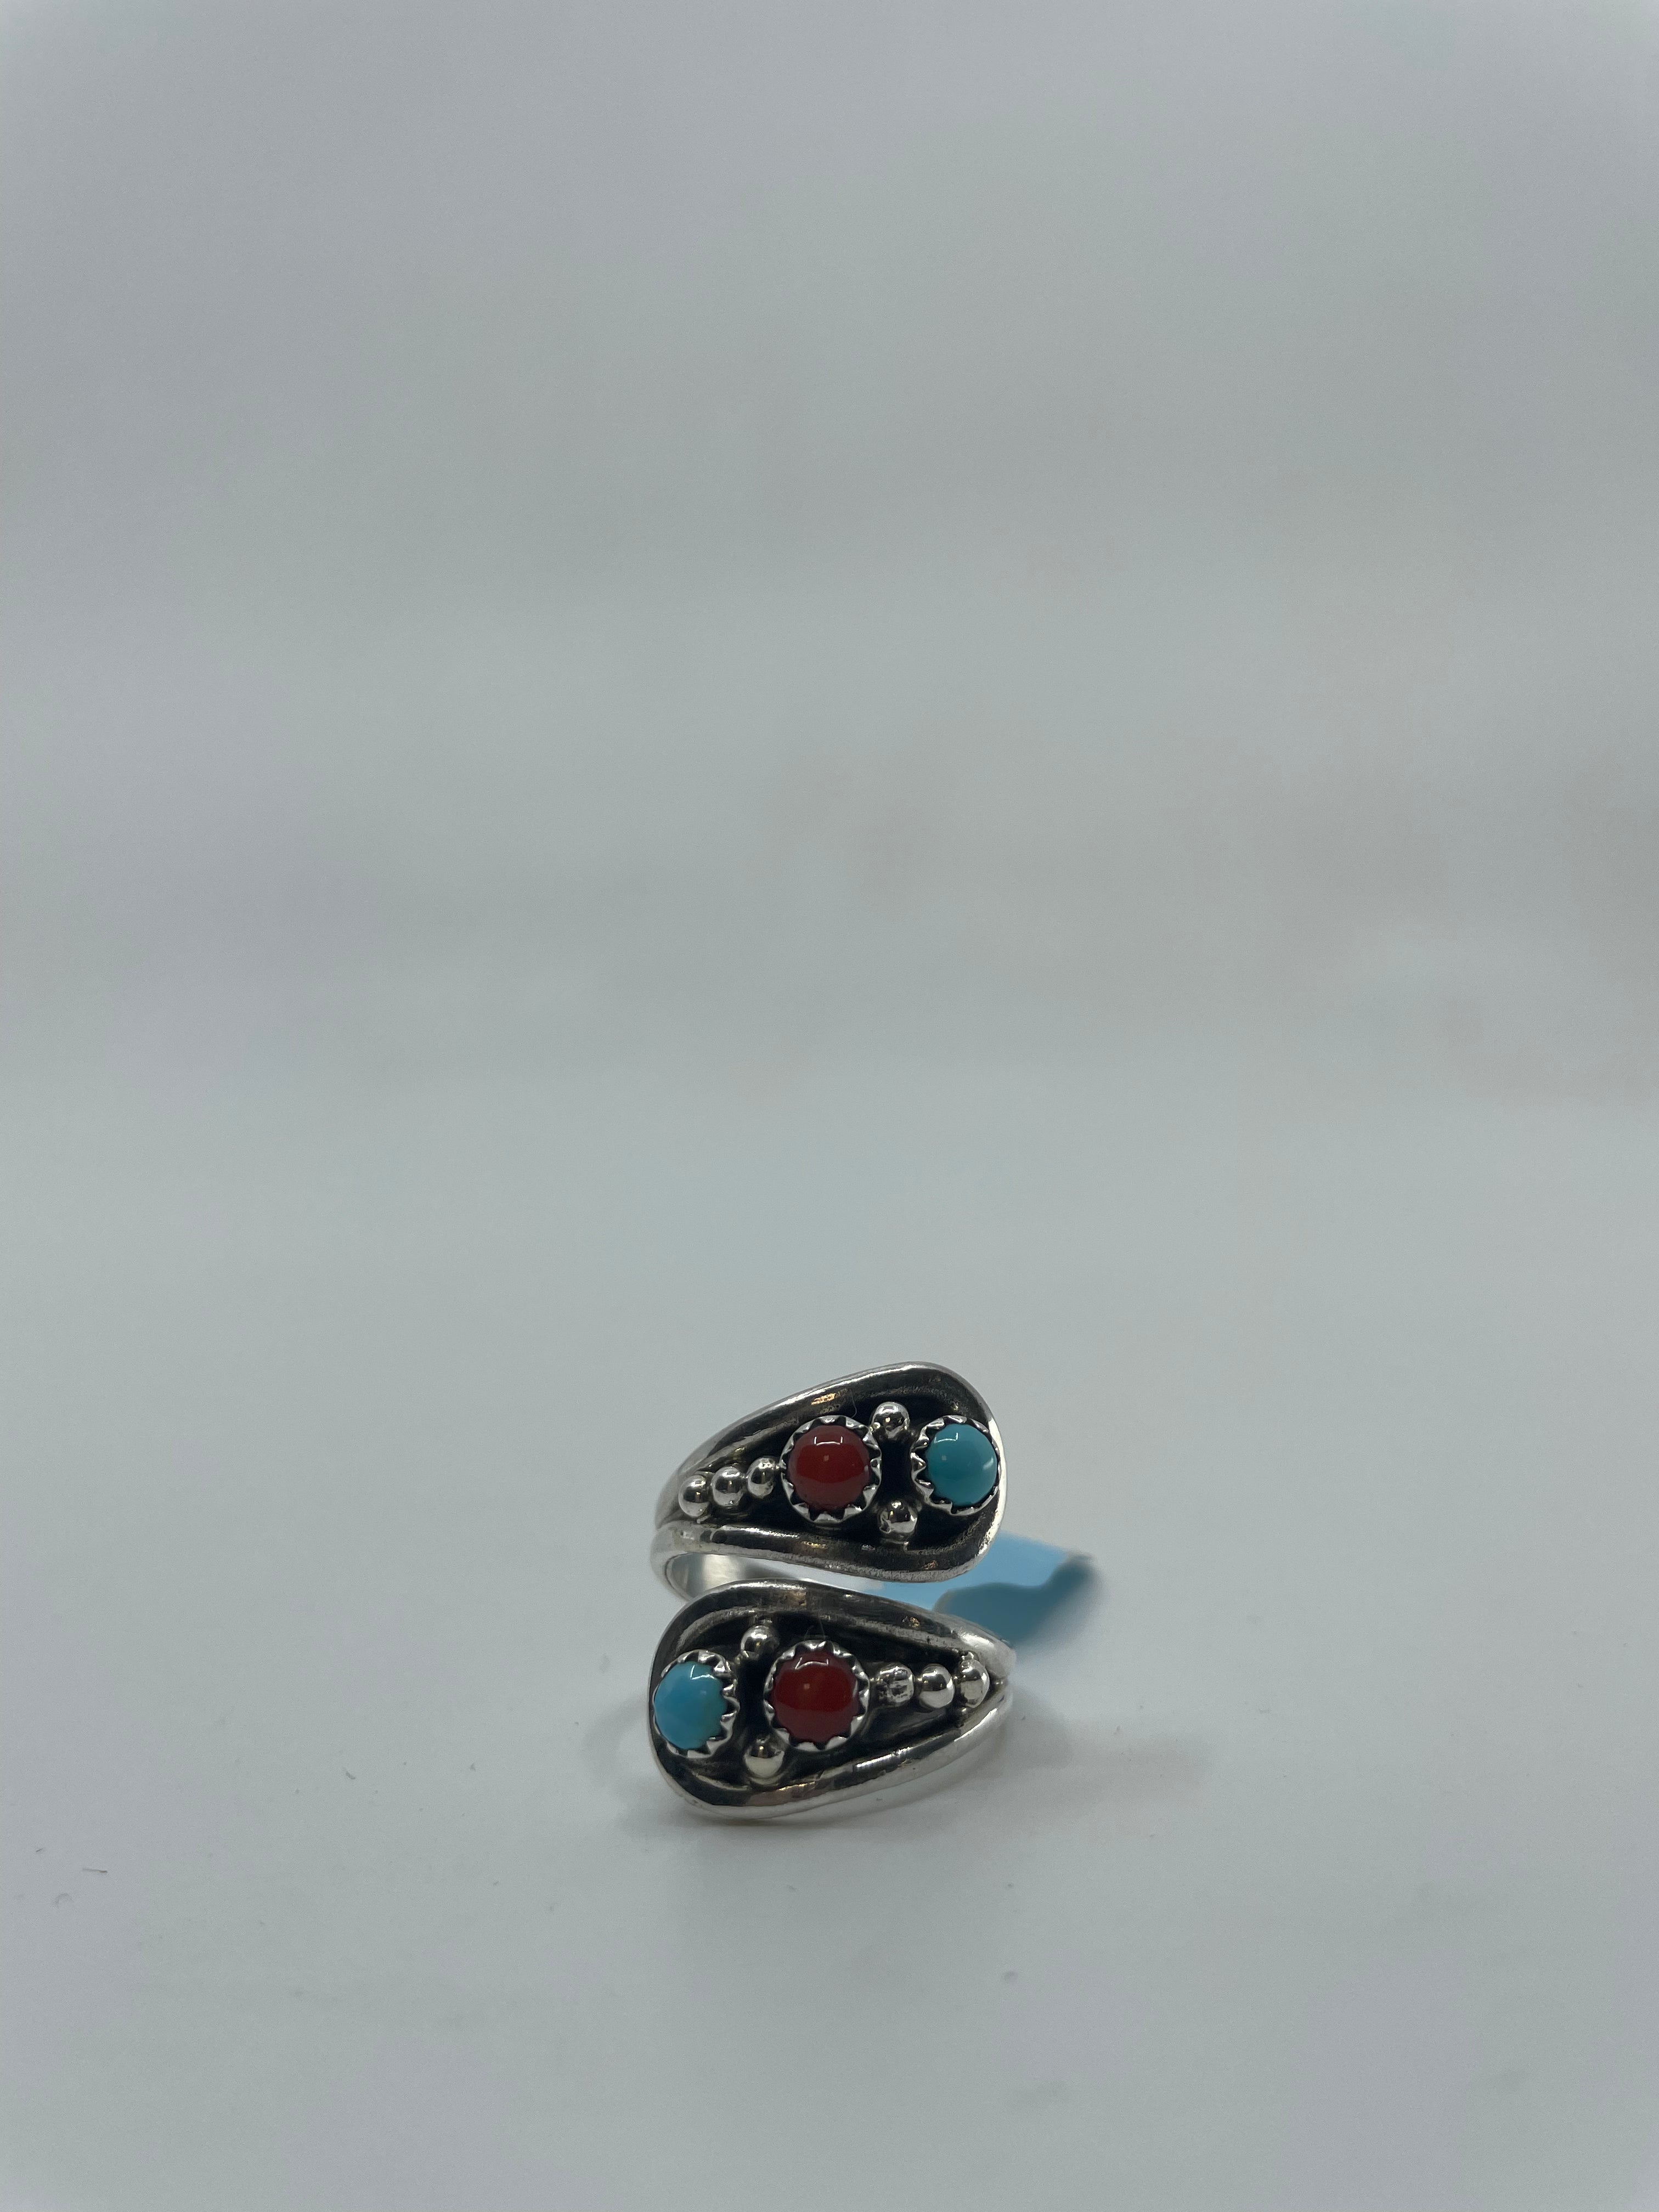 Handmade Navajo Turquoise & Coral Adjustable Spoon Ring PSTPR01